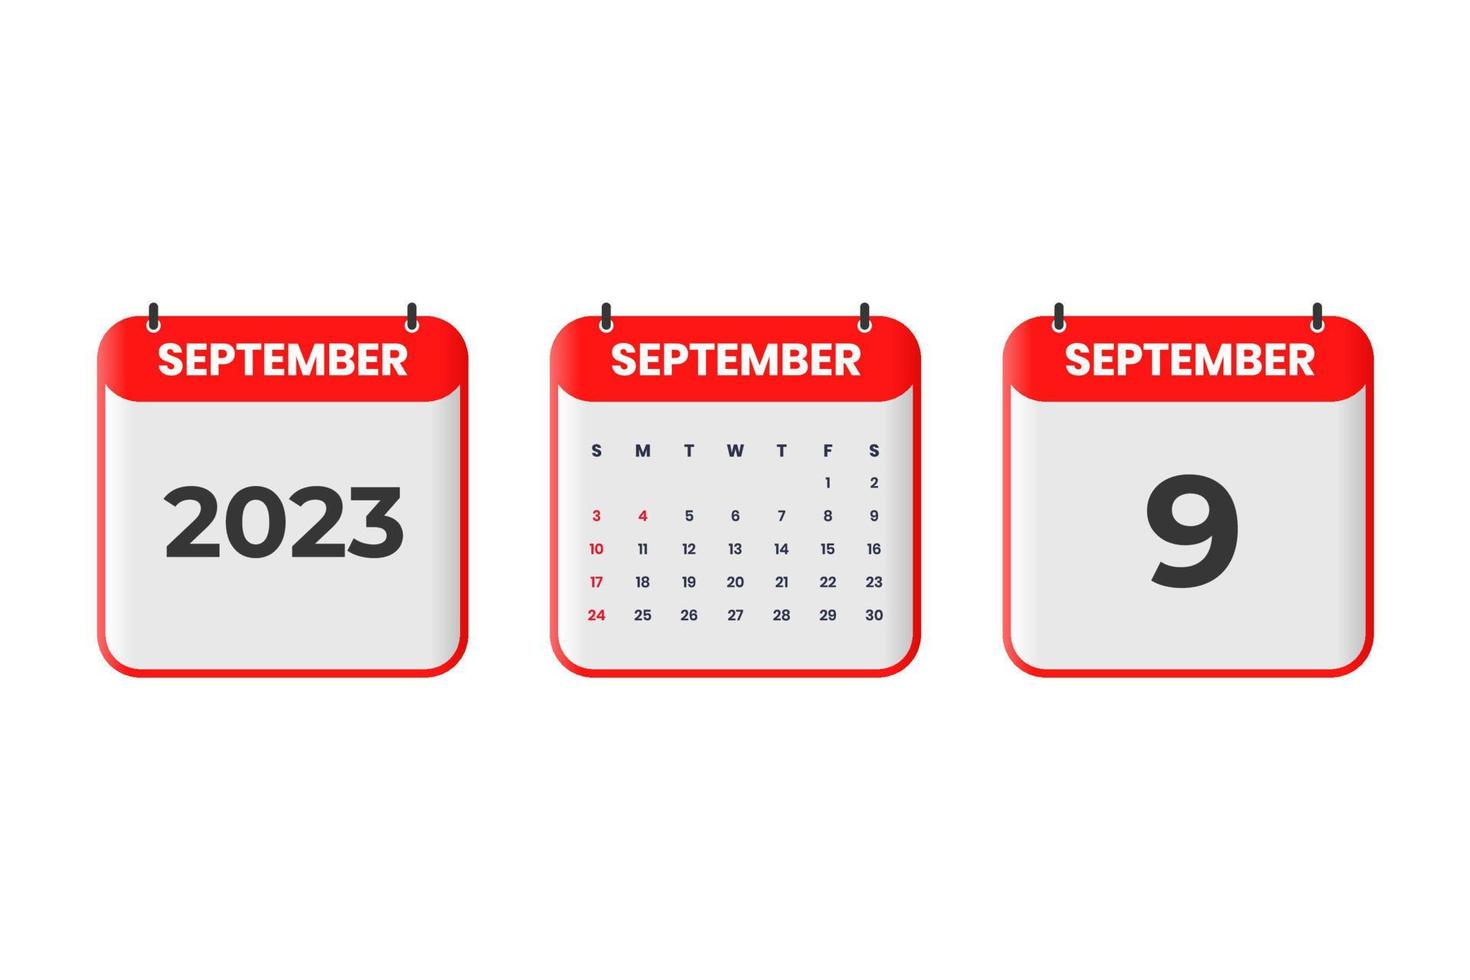 September 2023 calendar design. 9th September 2023 calendar icon for schedule, appointment, important date concept vector